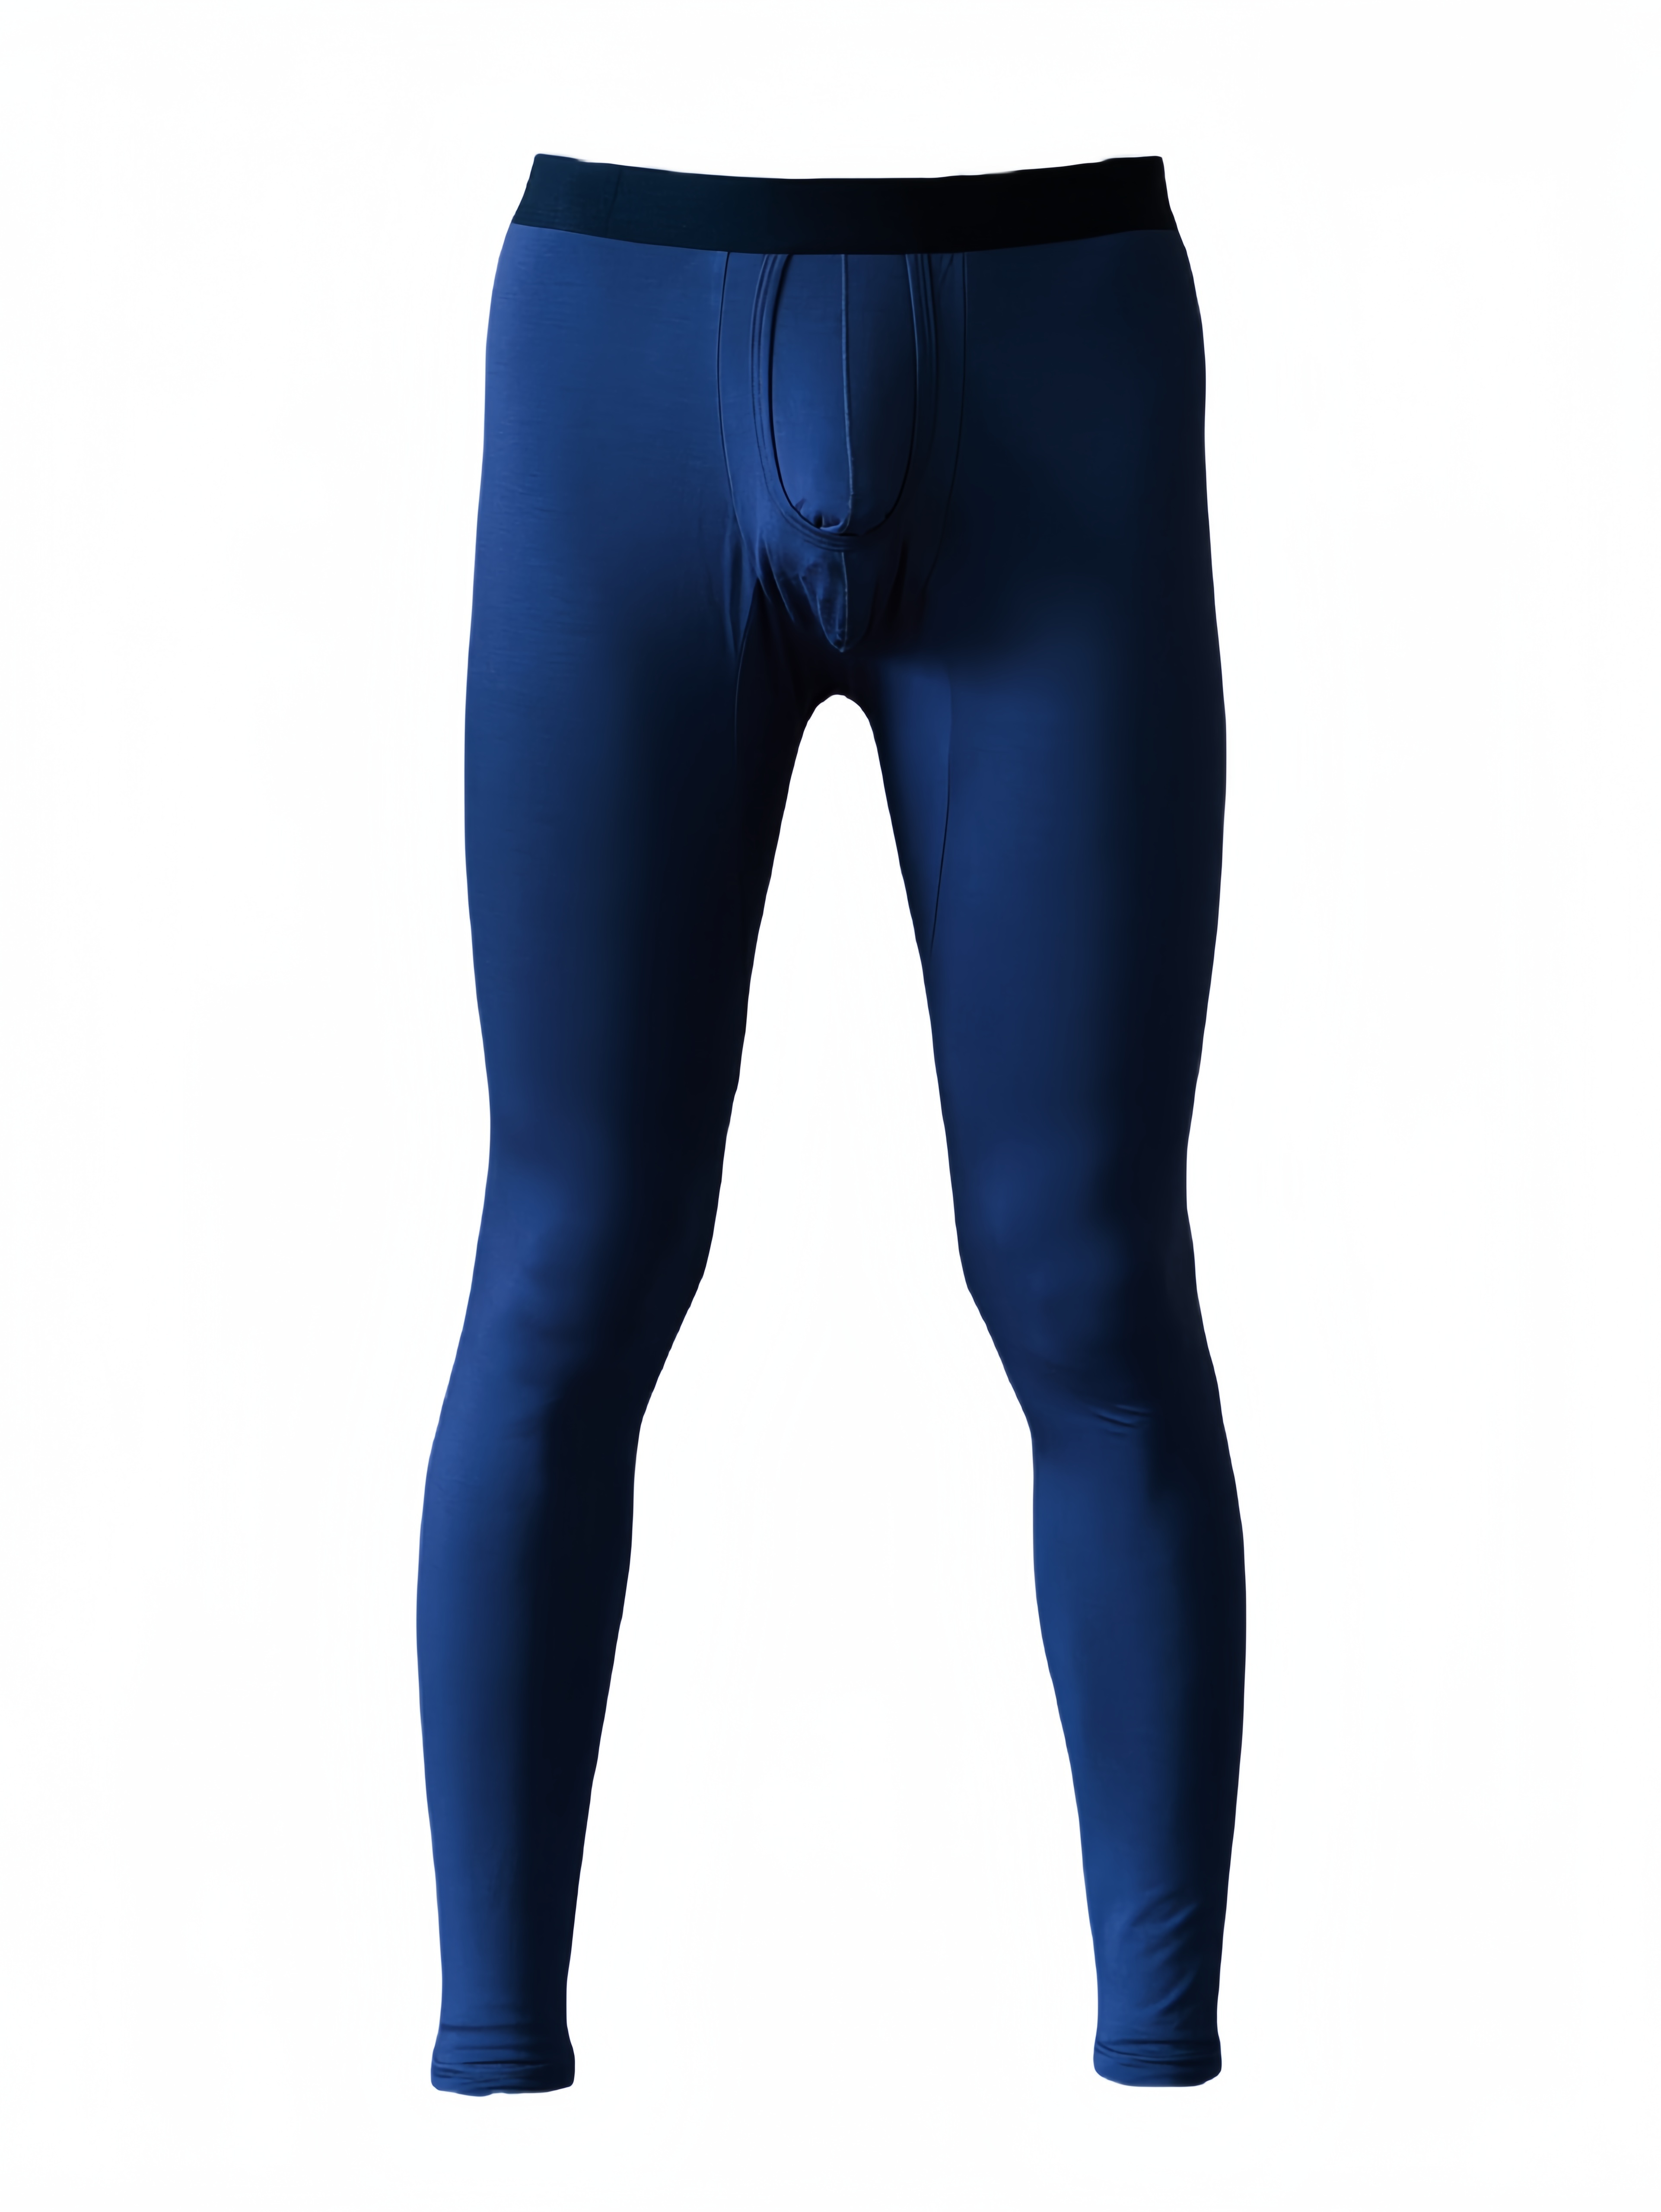 Breathable Thermal Underwear Pants Mens With Open Crotch